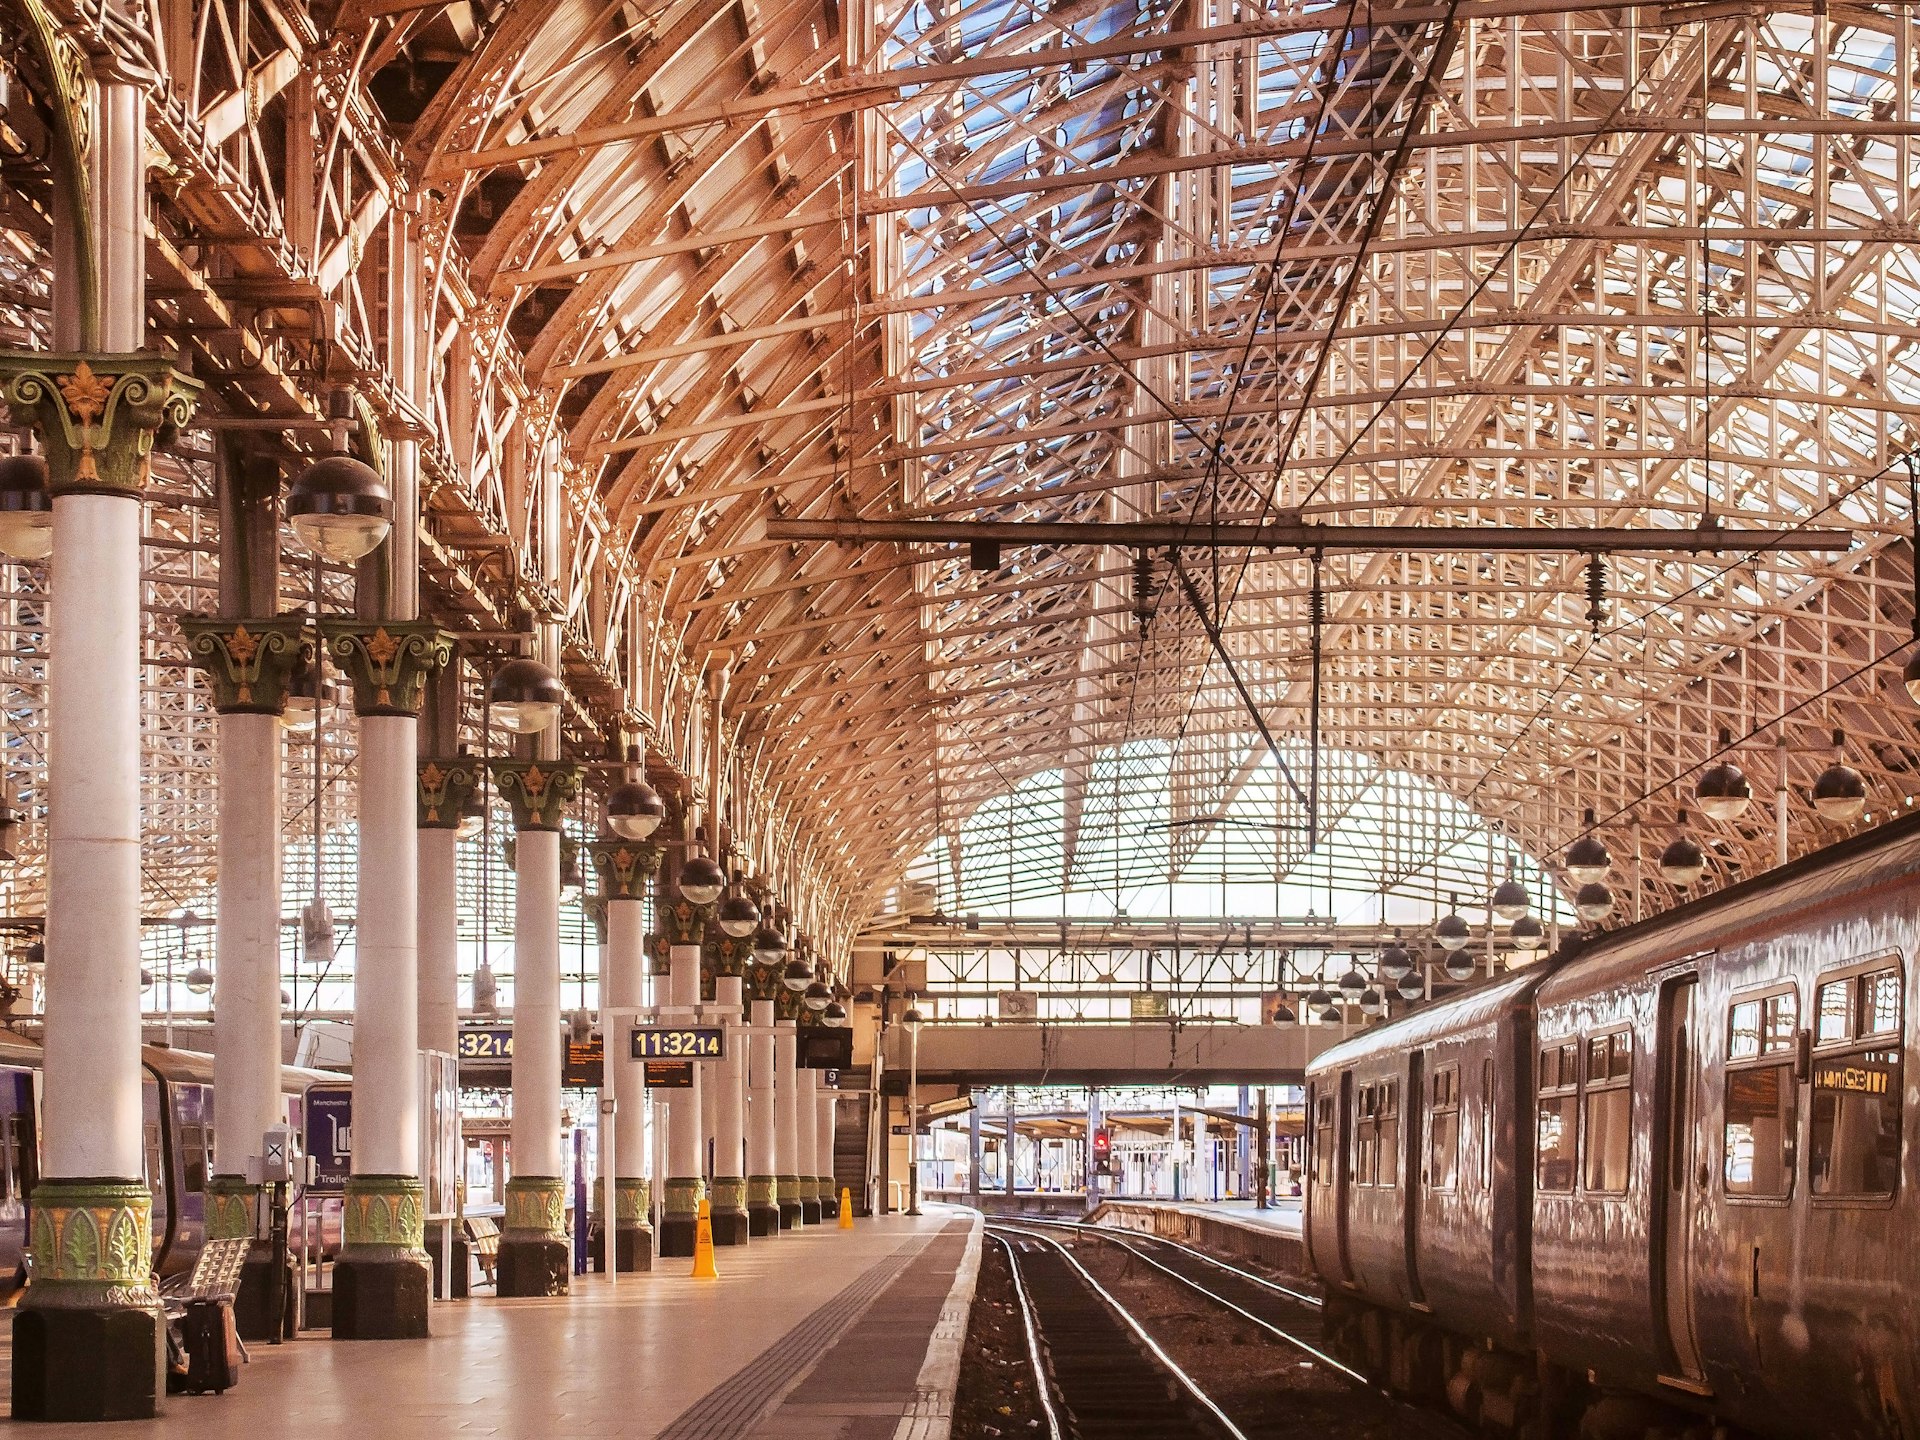 A view of the soaring Piccadilly train station in Manchester, England